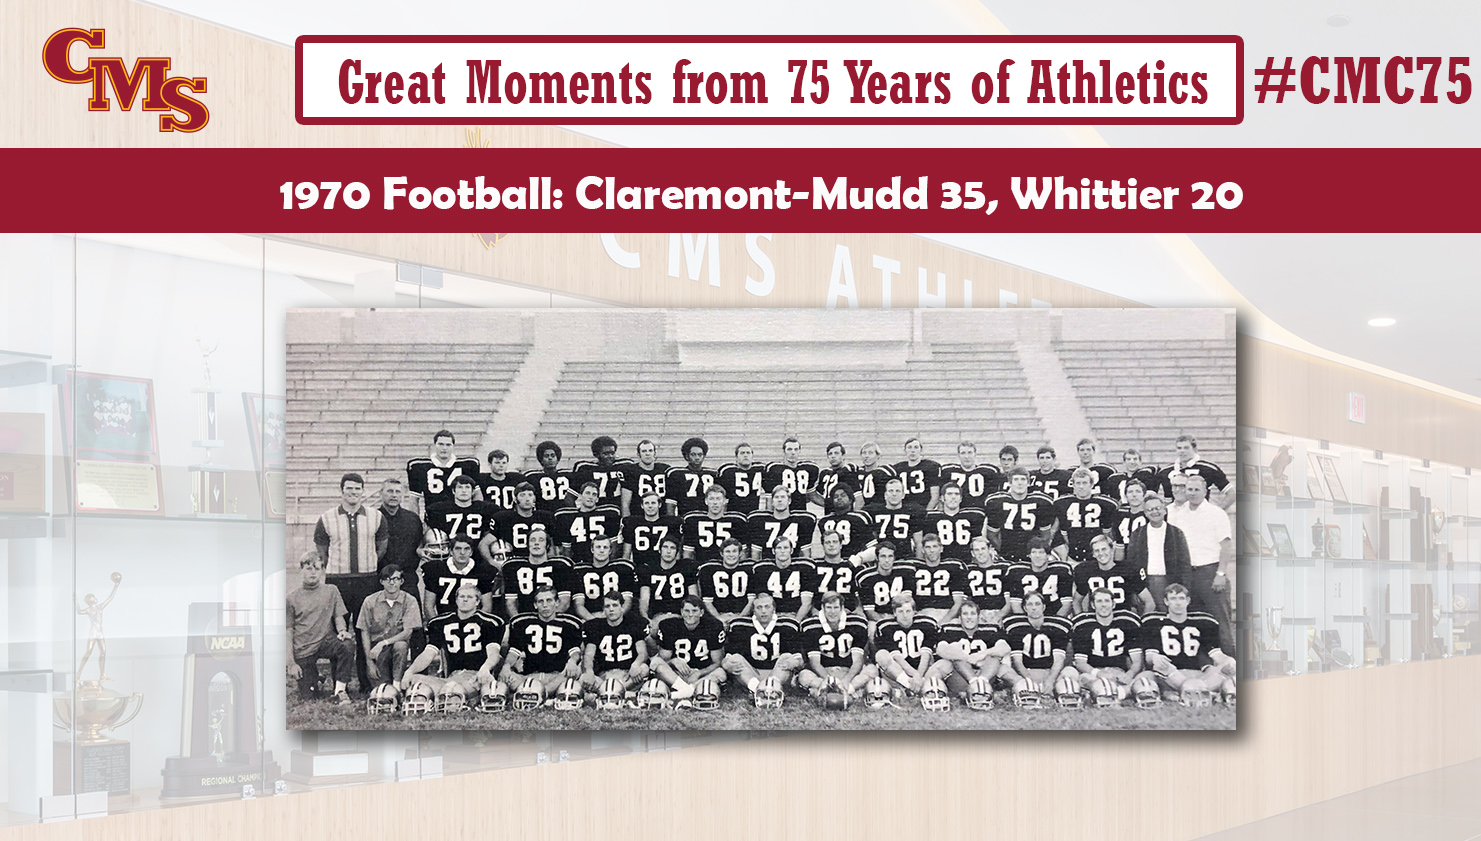 Team shot of the 1970 football team. Words over the photo read: Great Moments from 75 Years of Athletics, 1970 Football: Claremont-Mudd 35, Whittier 20